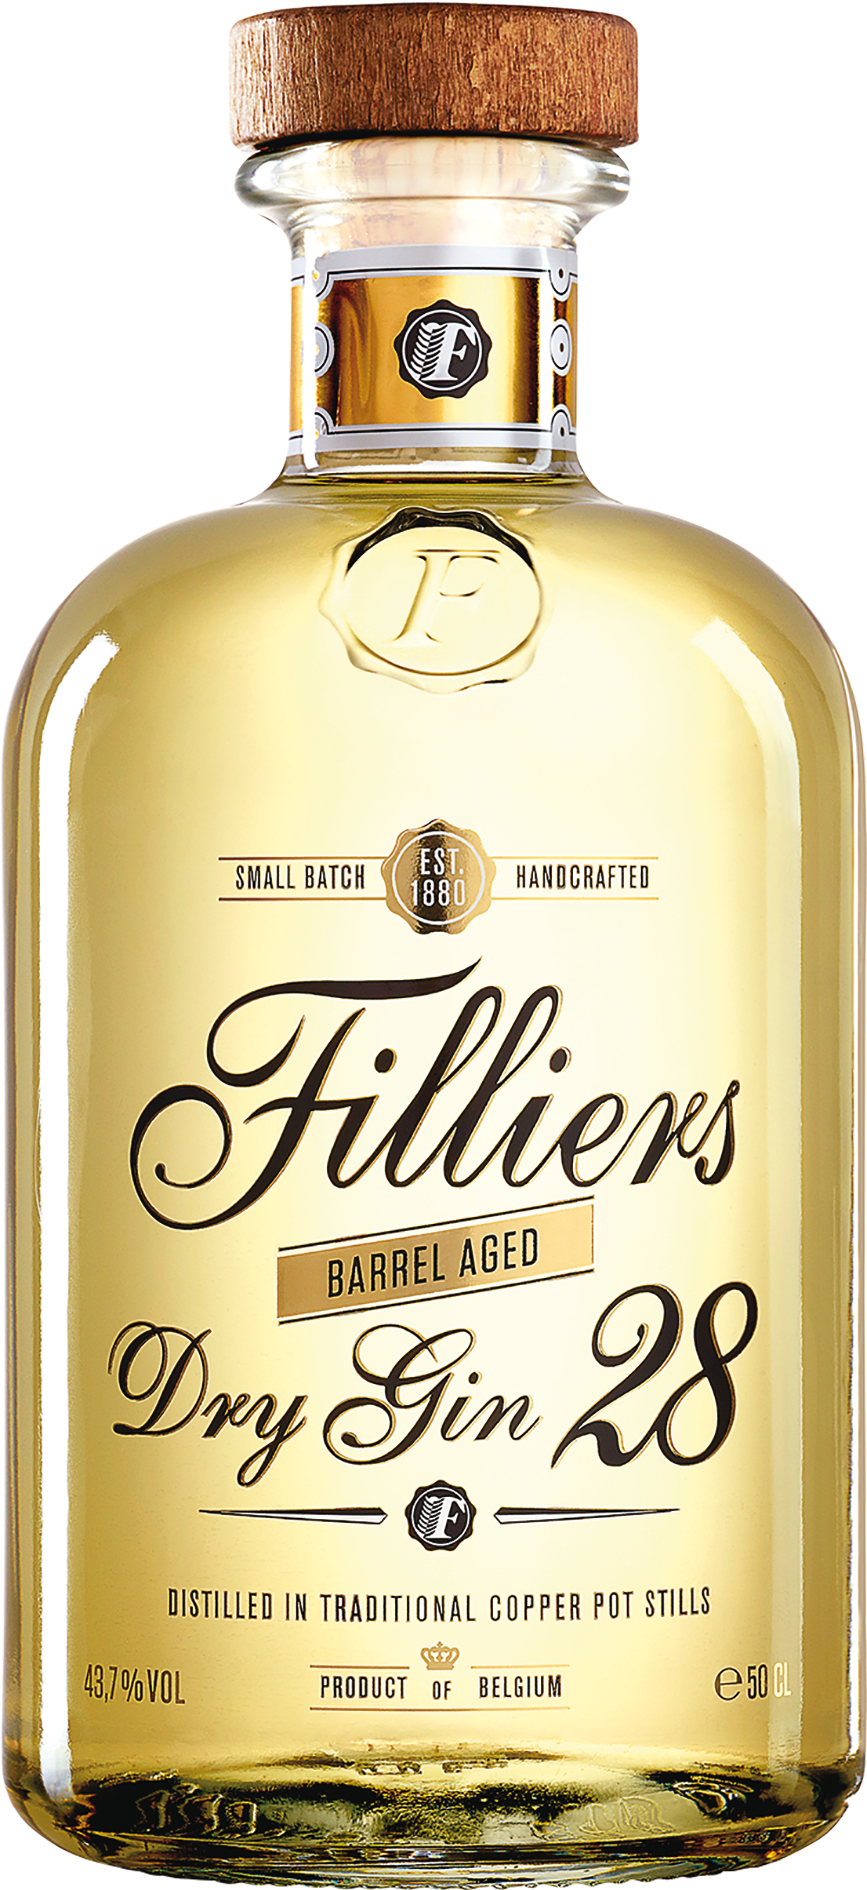 Filliers Dry Gin 28 - Barrel Aged Dry Gin